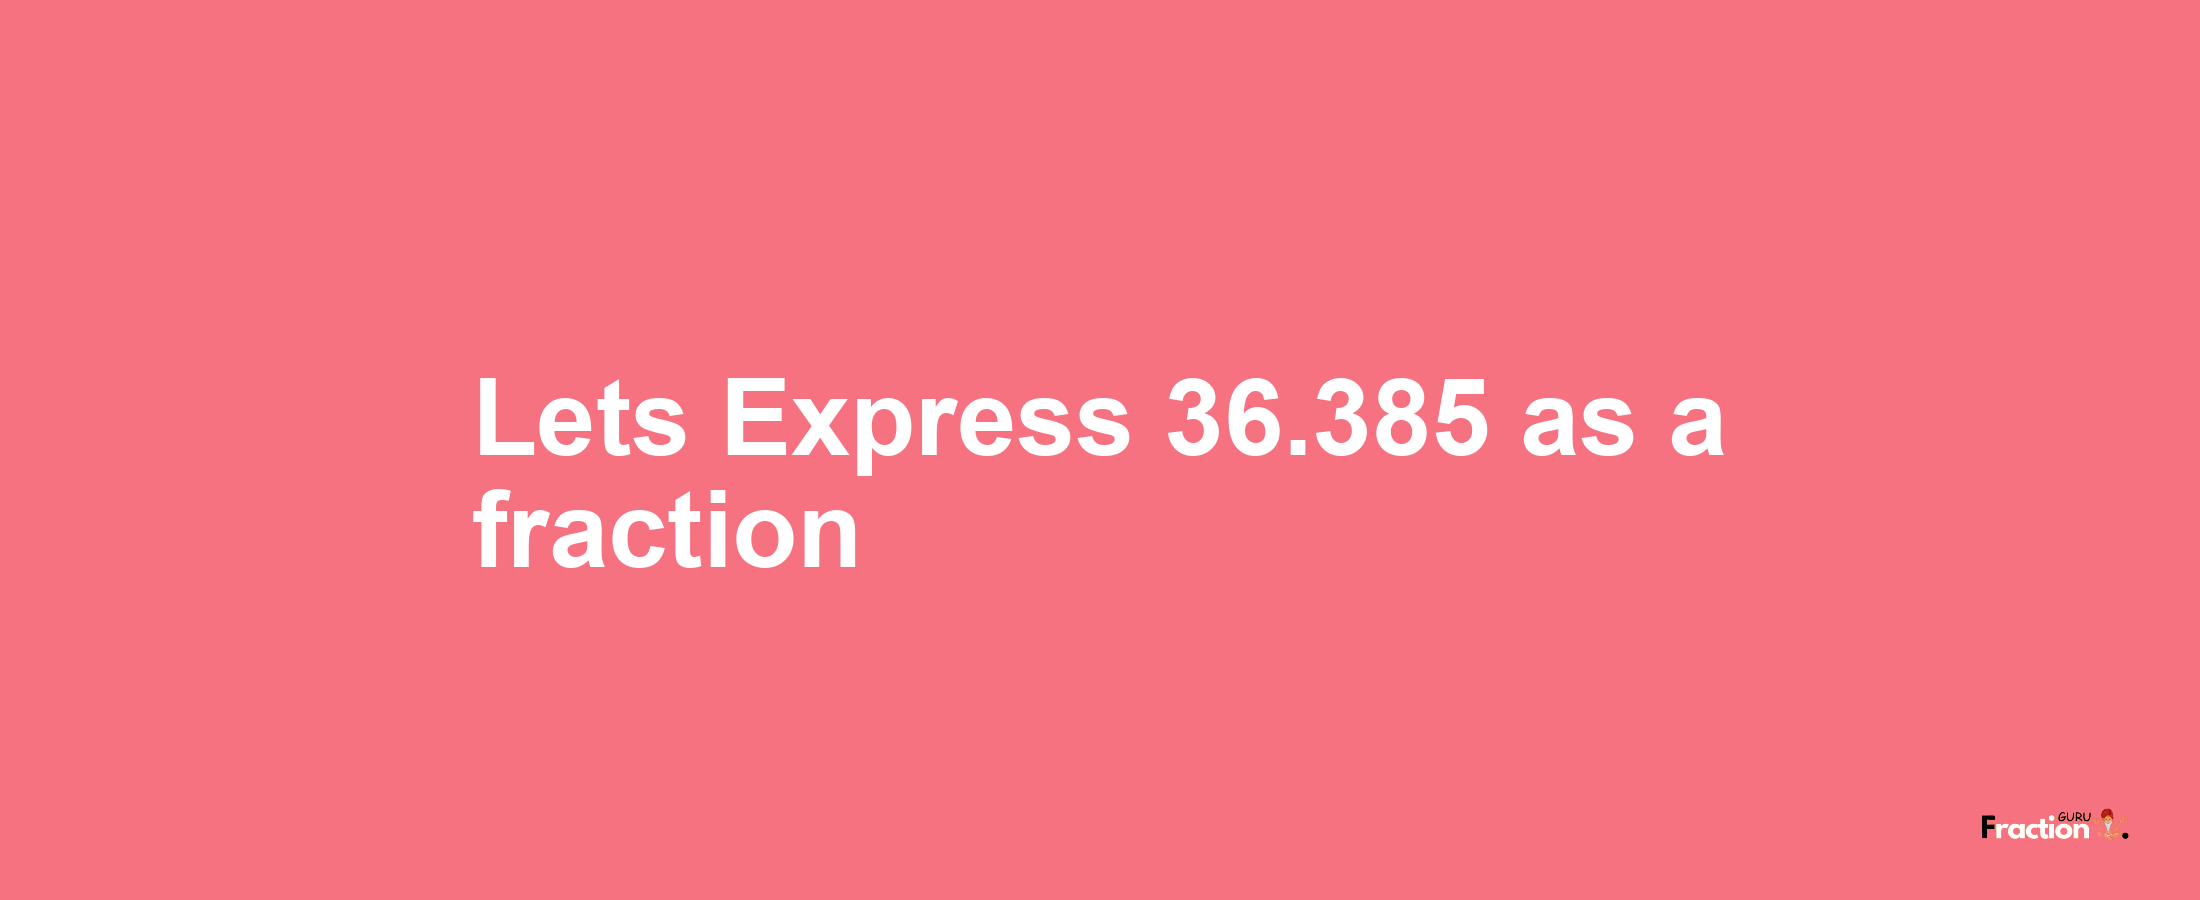 Lets Express 36.385 as afraction